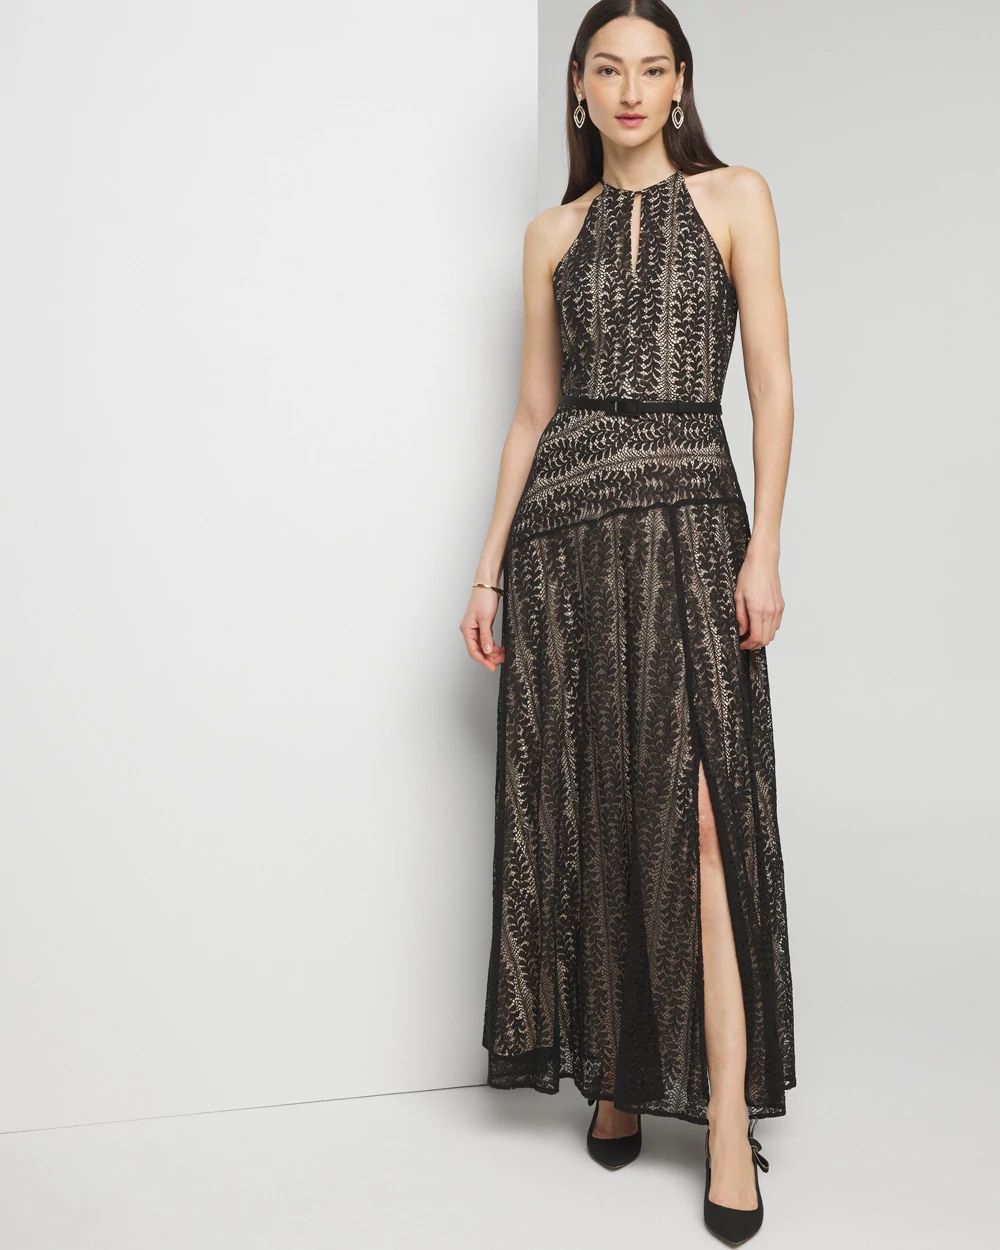 Sleeveless Halter Lace Maxi Dress click to view larger image.